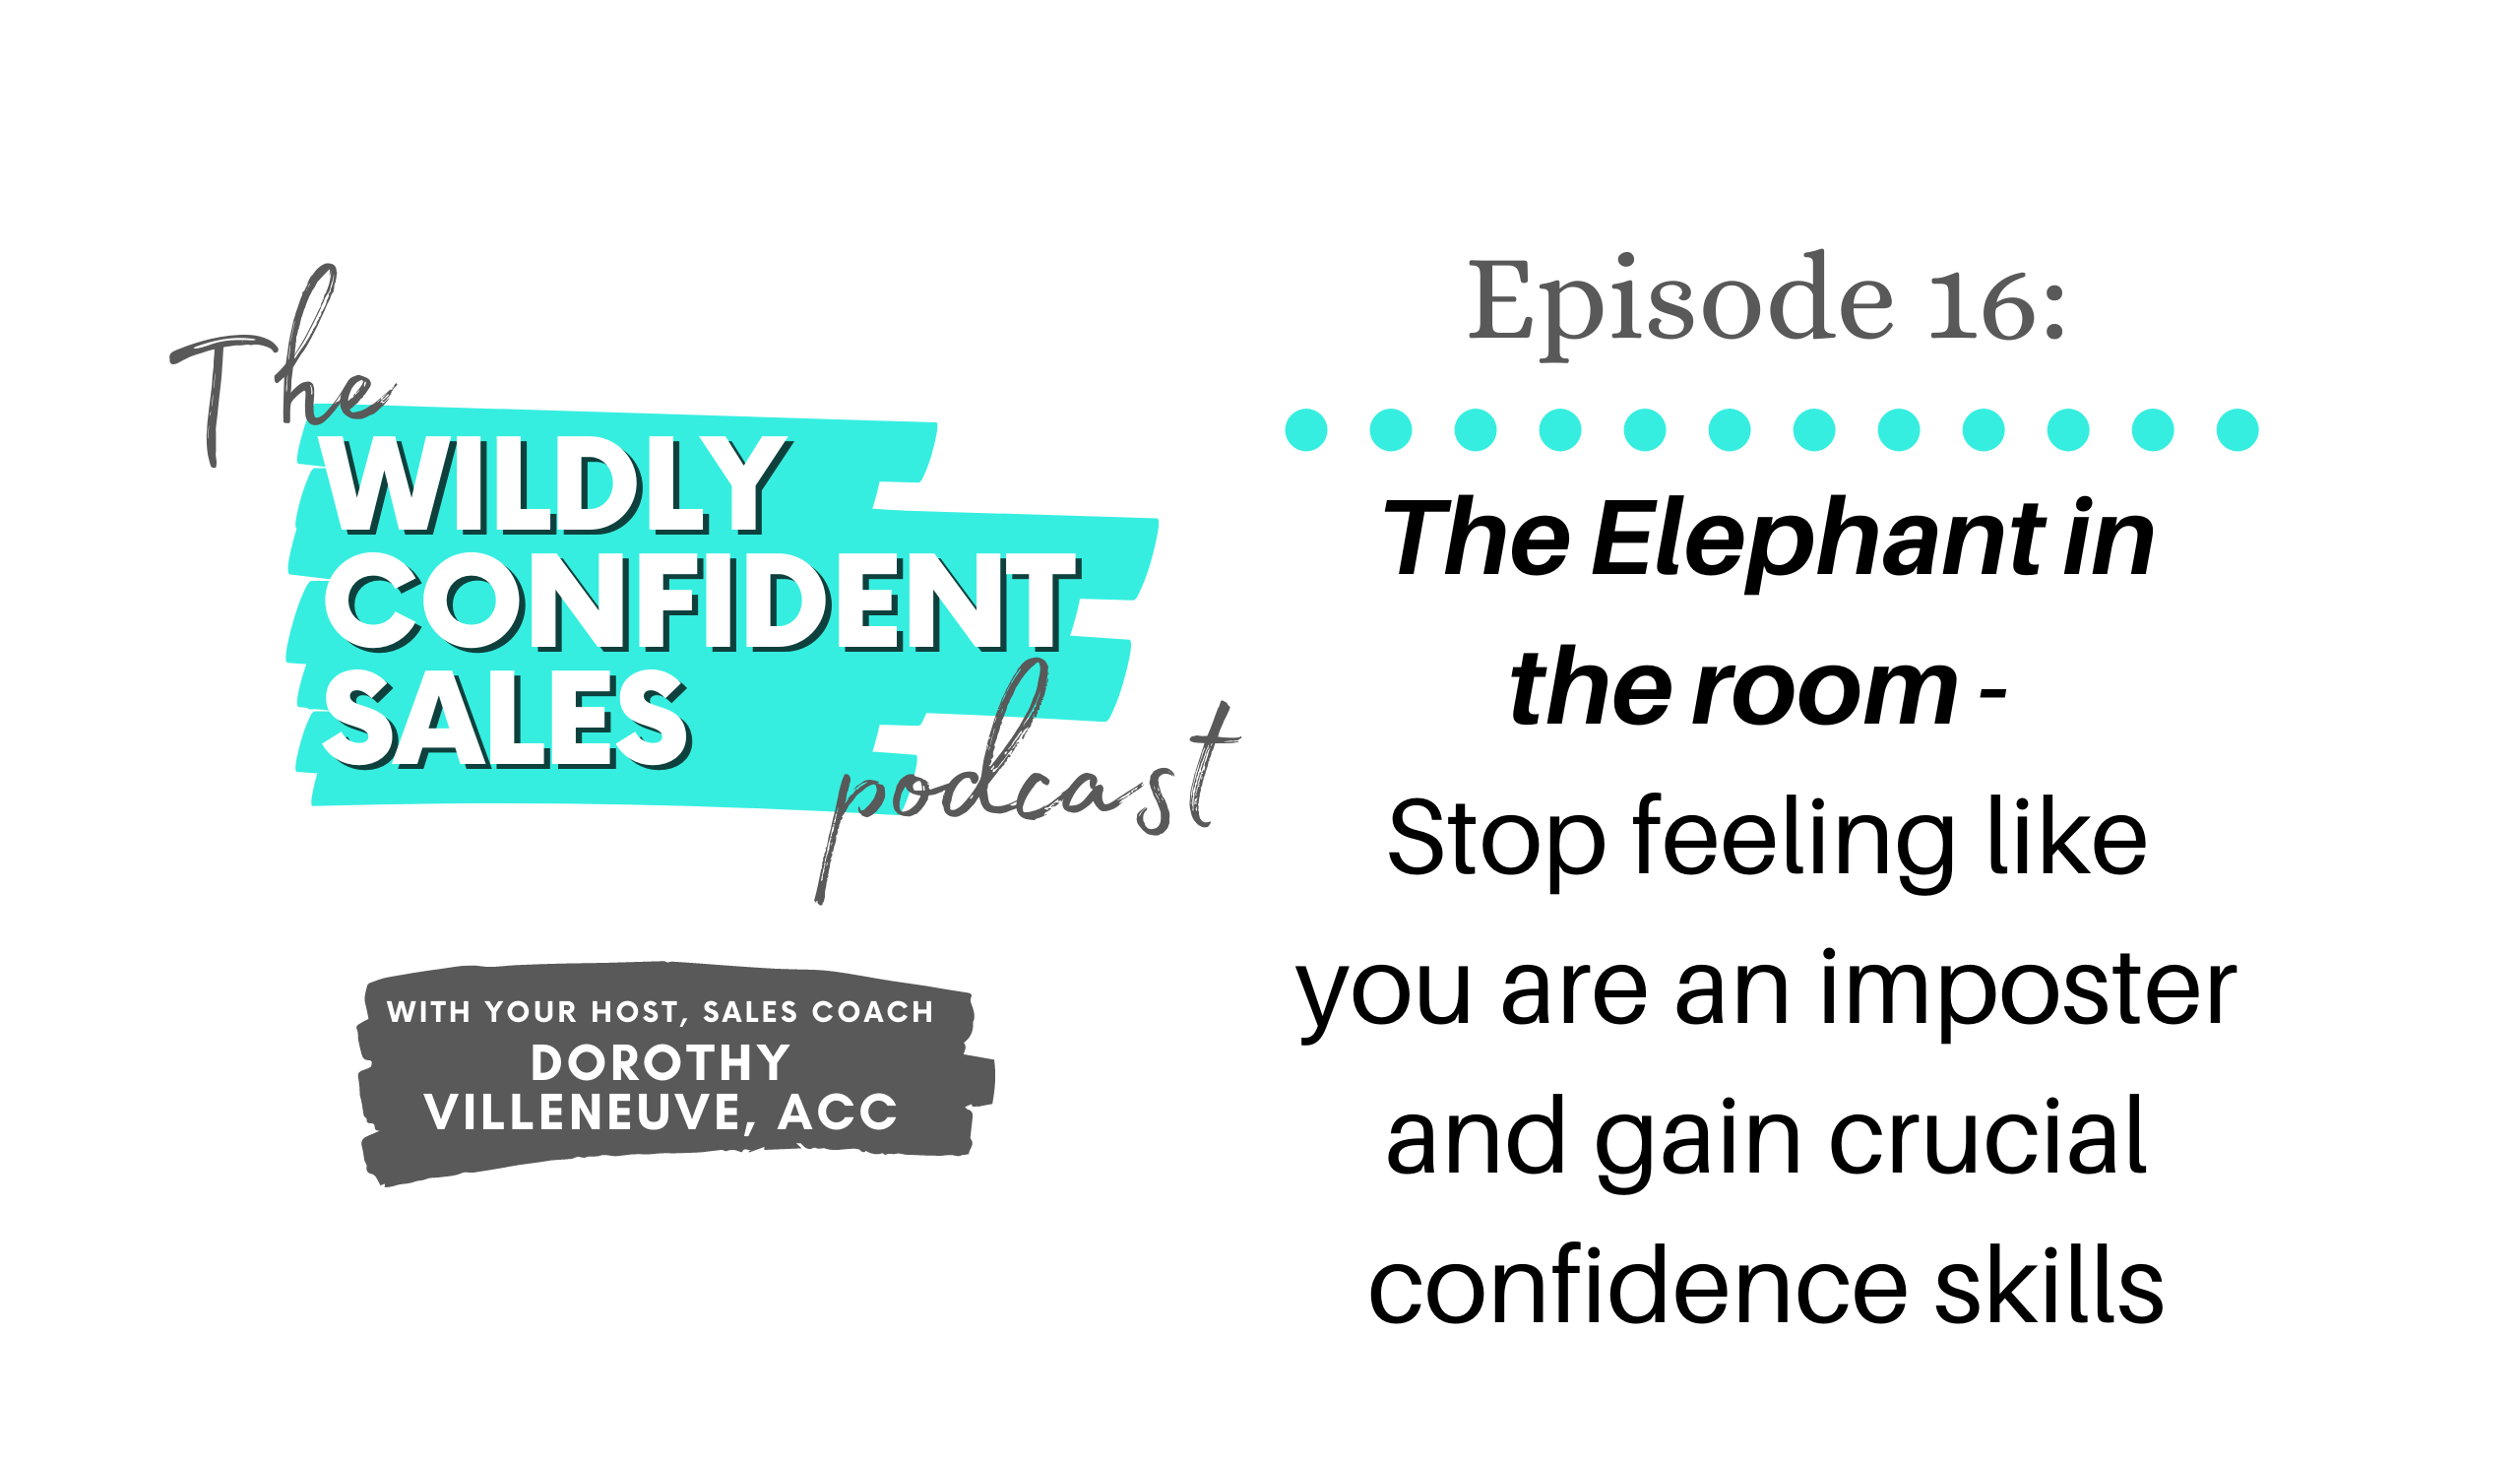 The Elephant in the Room - Stop Feeling Like You are an Imposter and Gain Crucial Confidence Skills